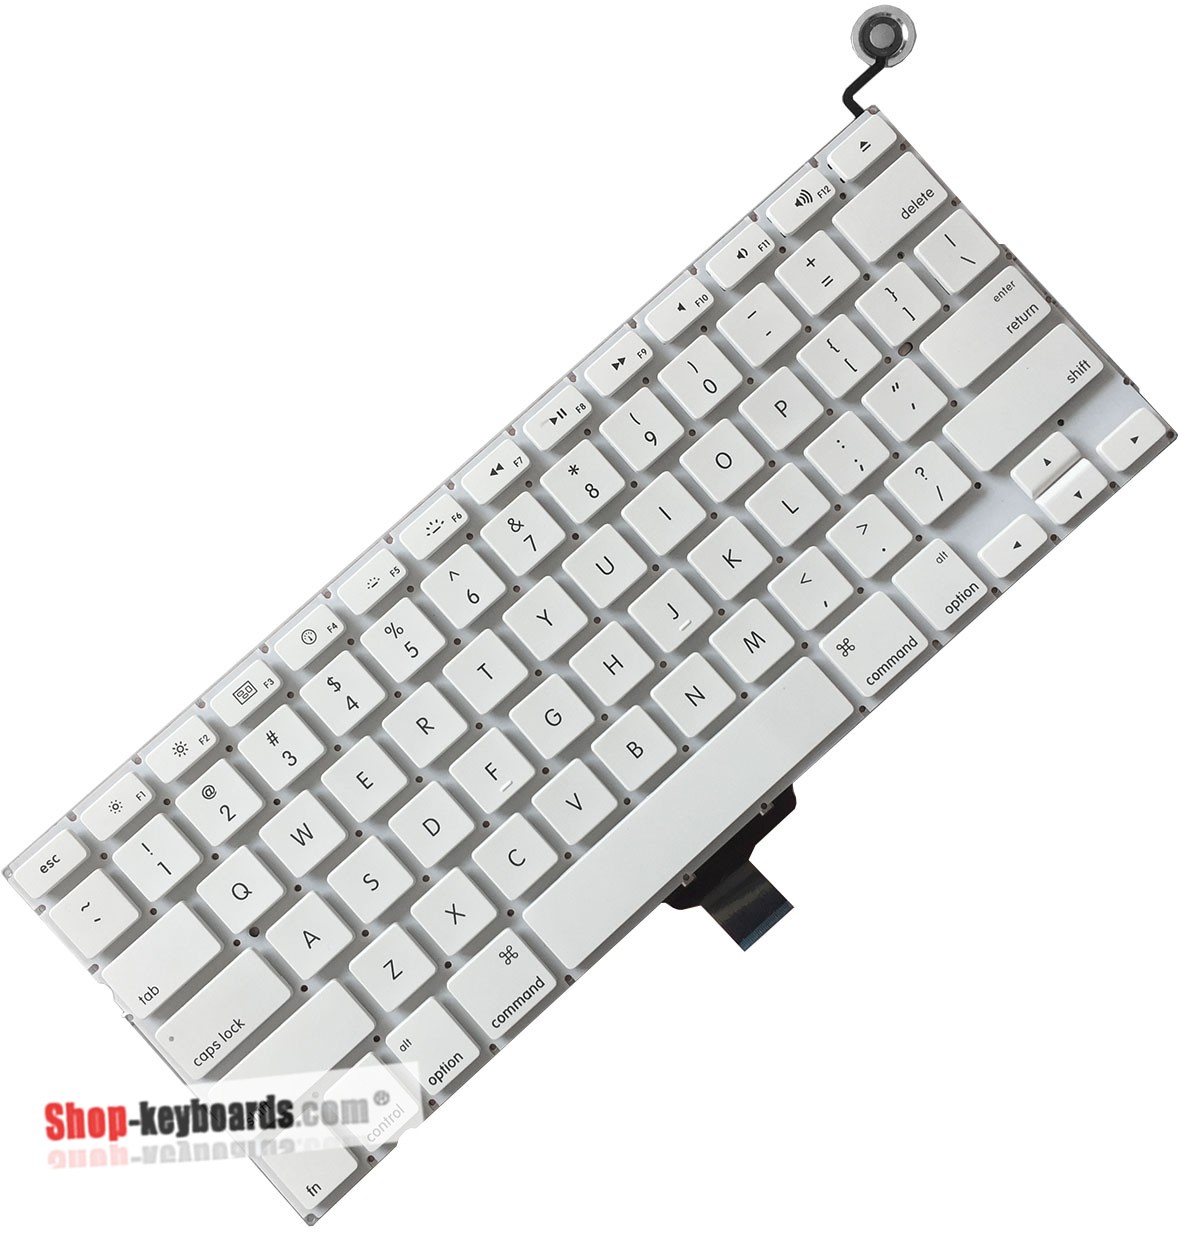 Apple MACBOOK MC207LL/A 13.3 INCH Keyboard replacement